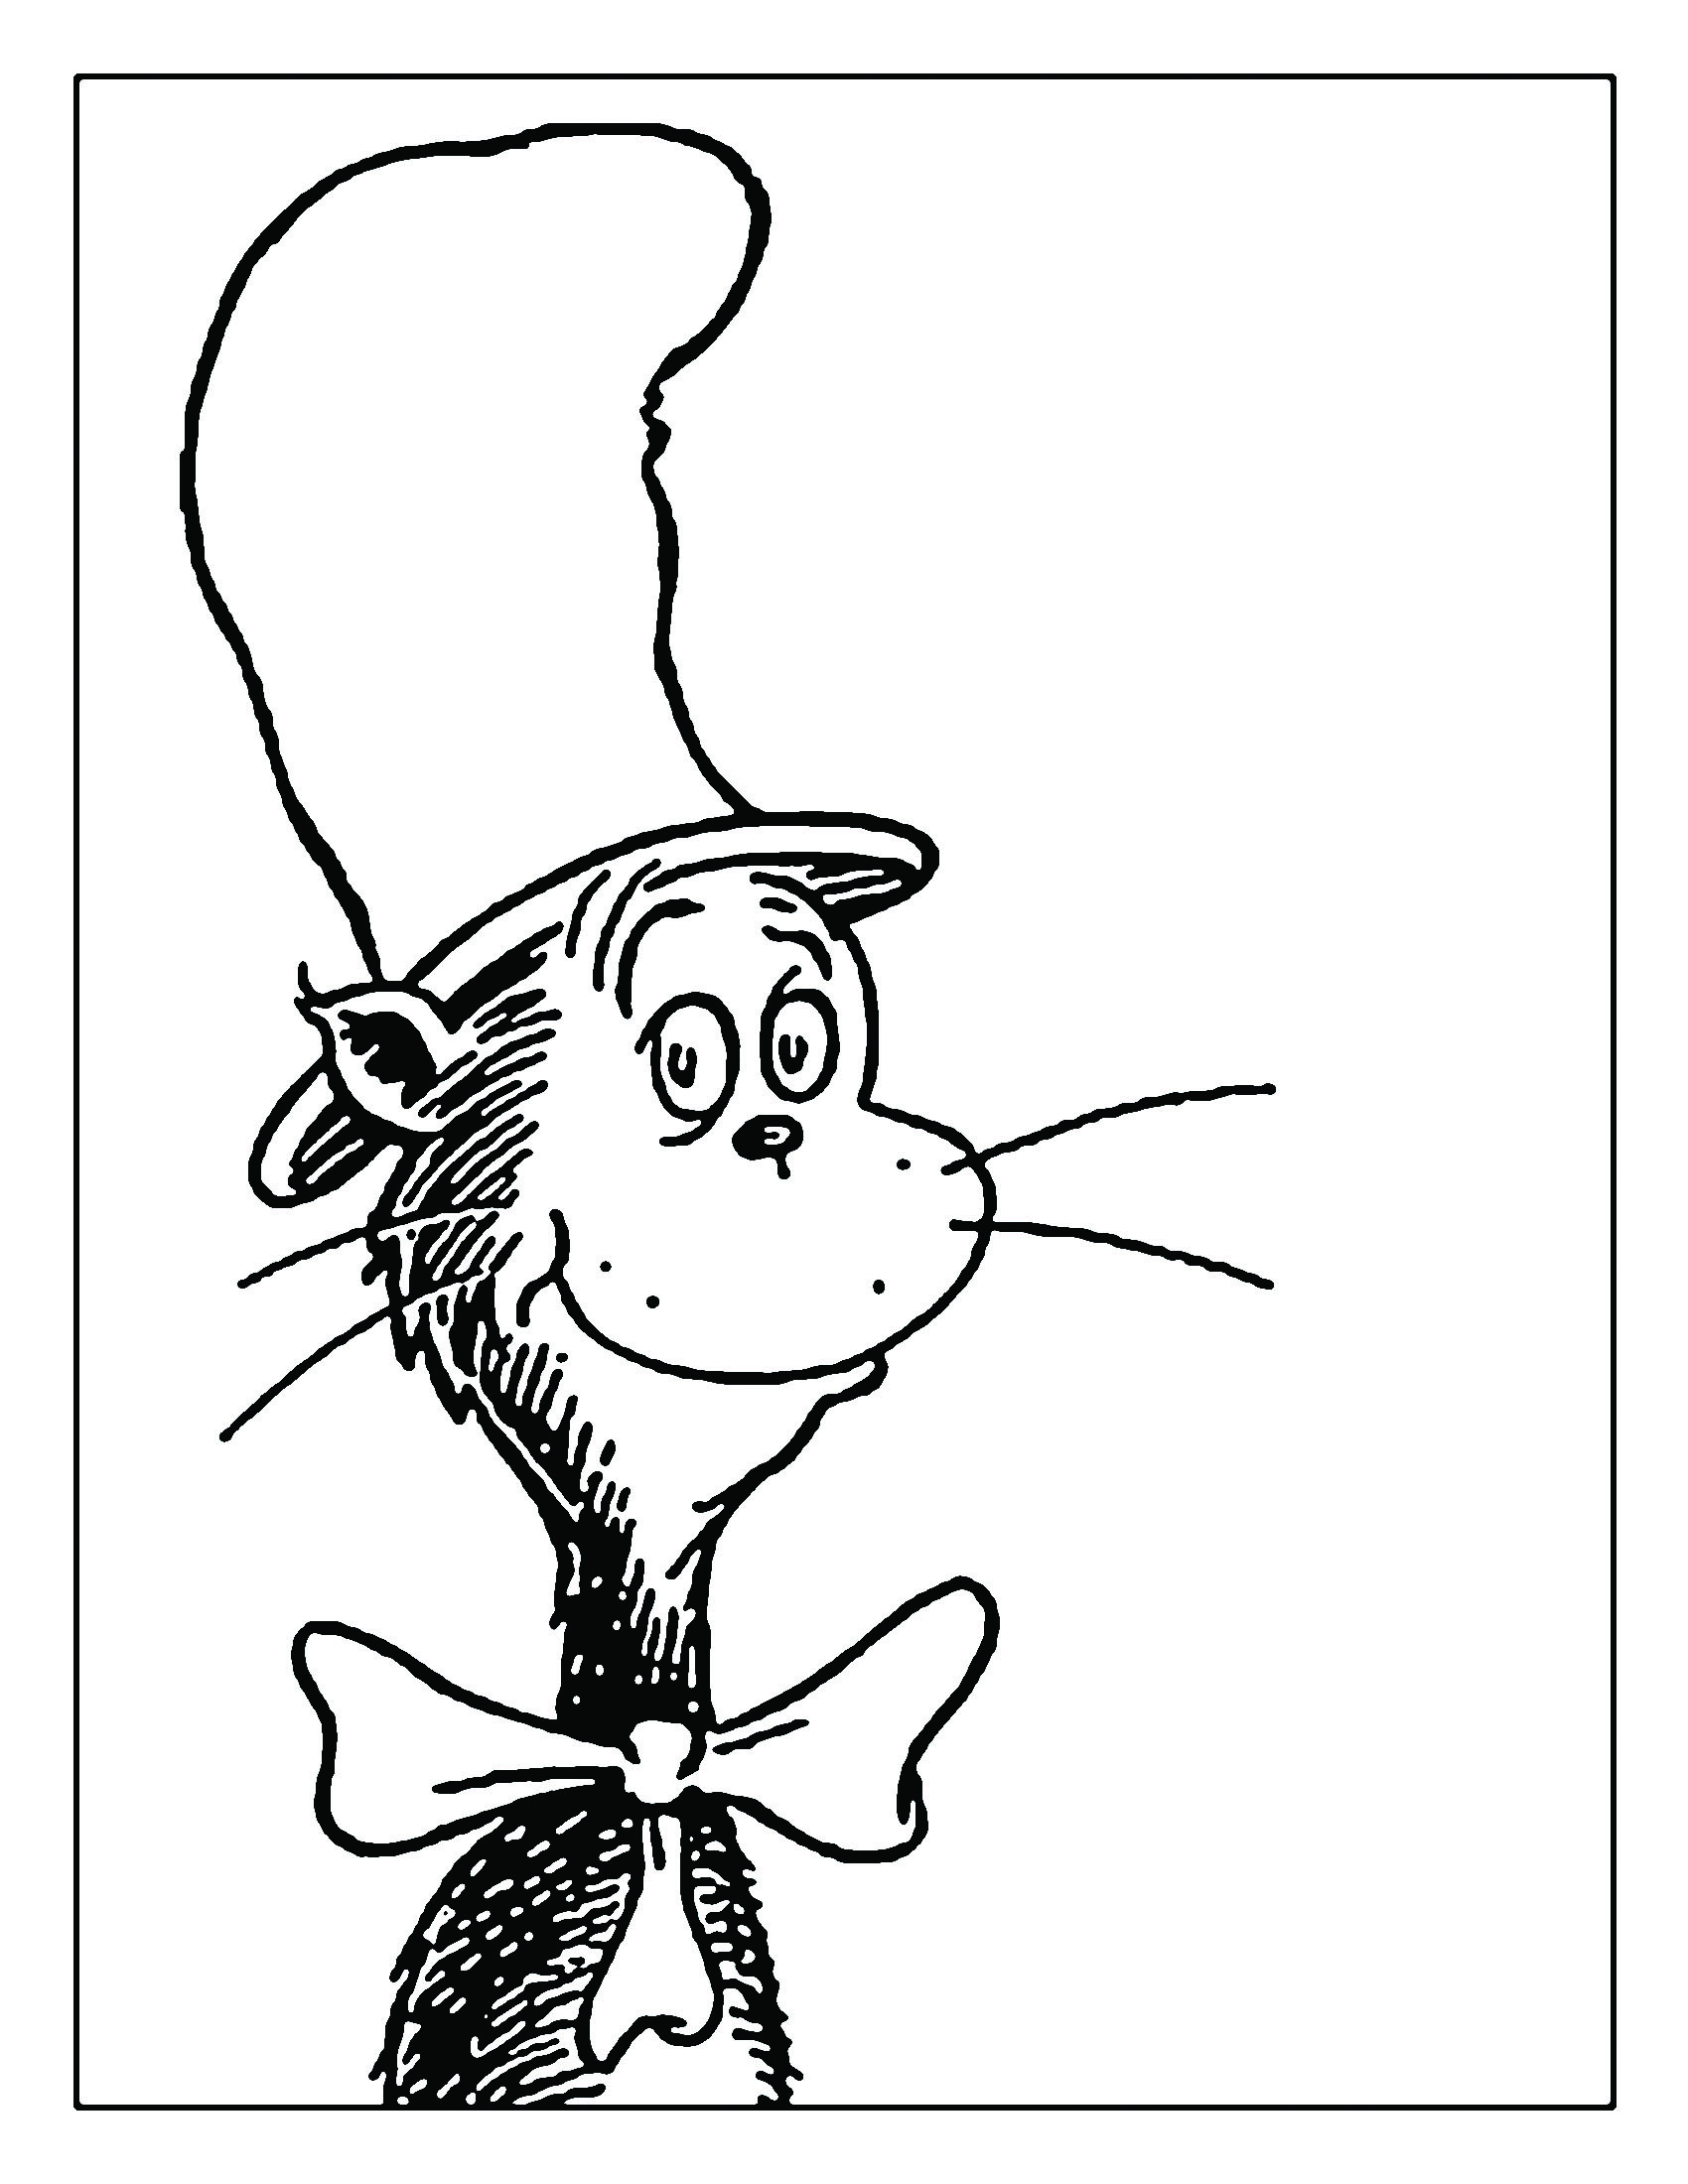 Dr Seuss Black And White   Clipart Panda   Free Clipart Images